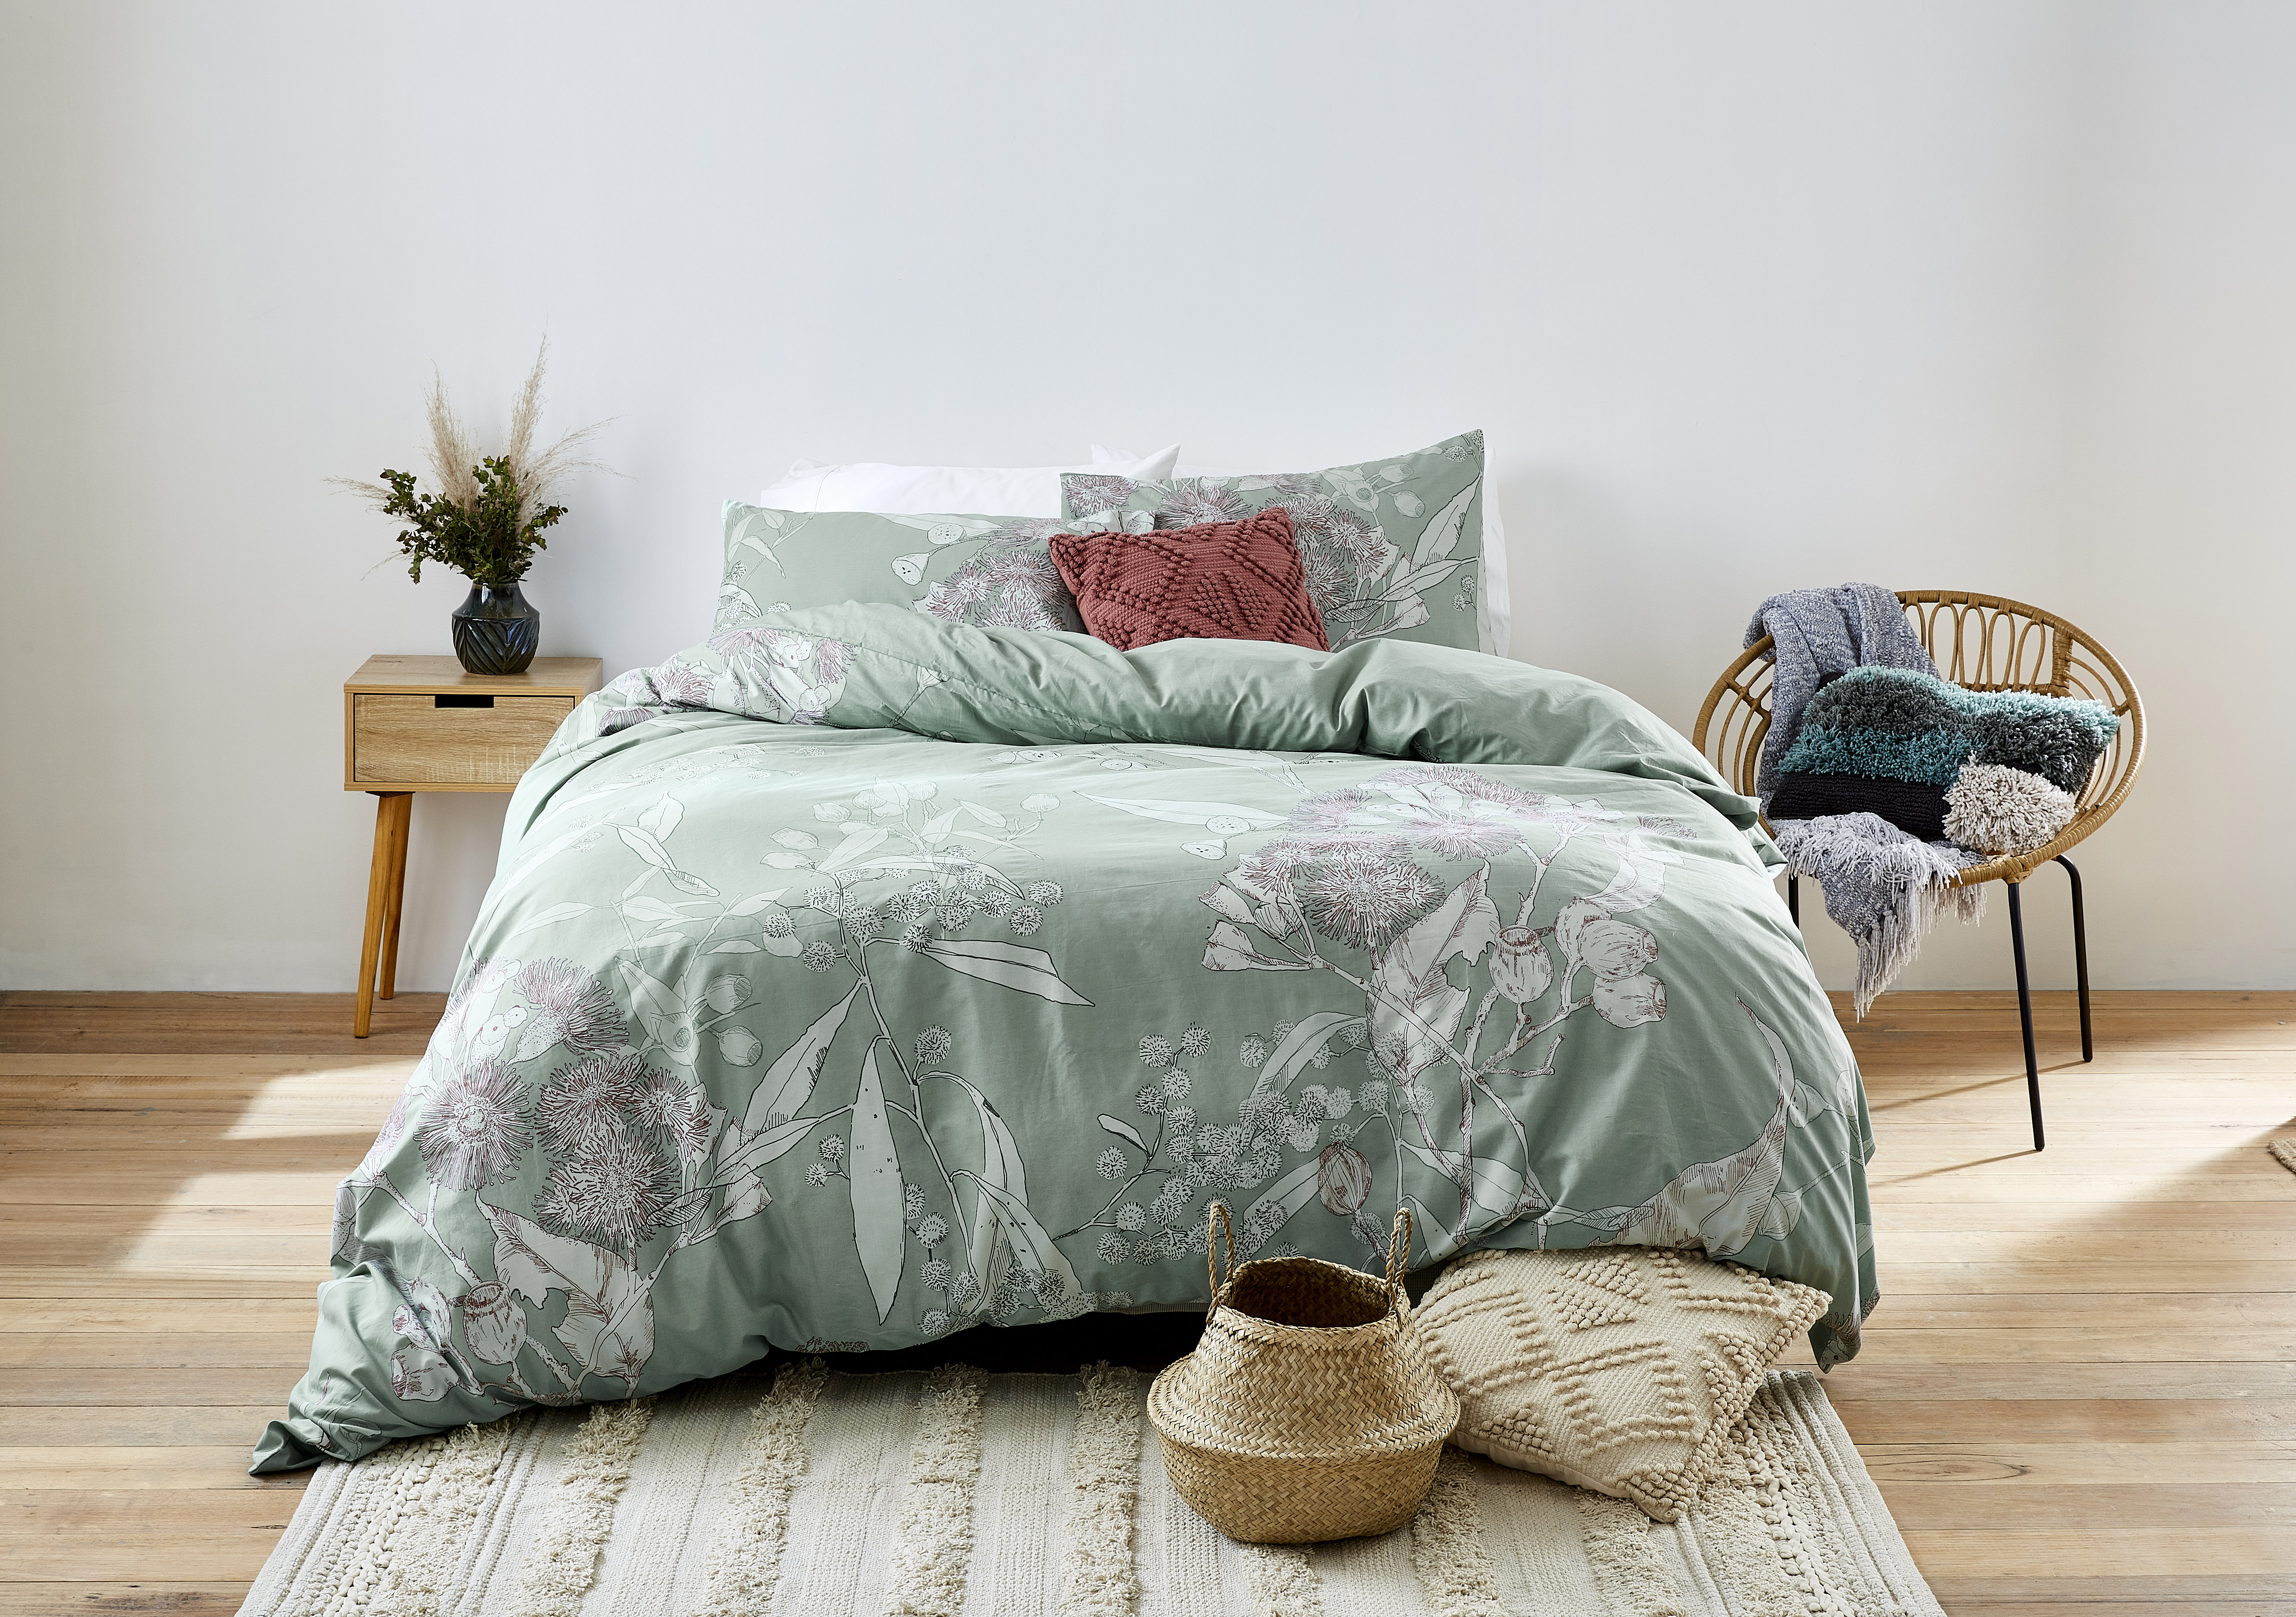 Target S Stylish Winter Homewares Range Our Top Picks The